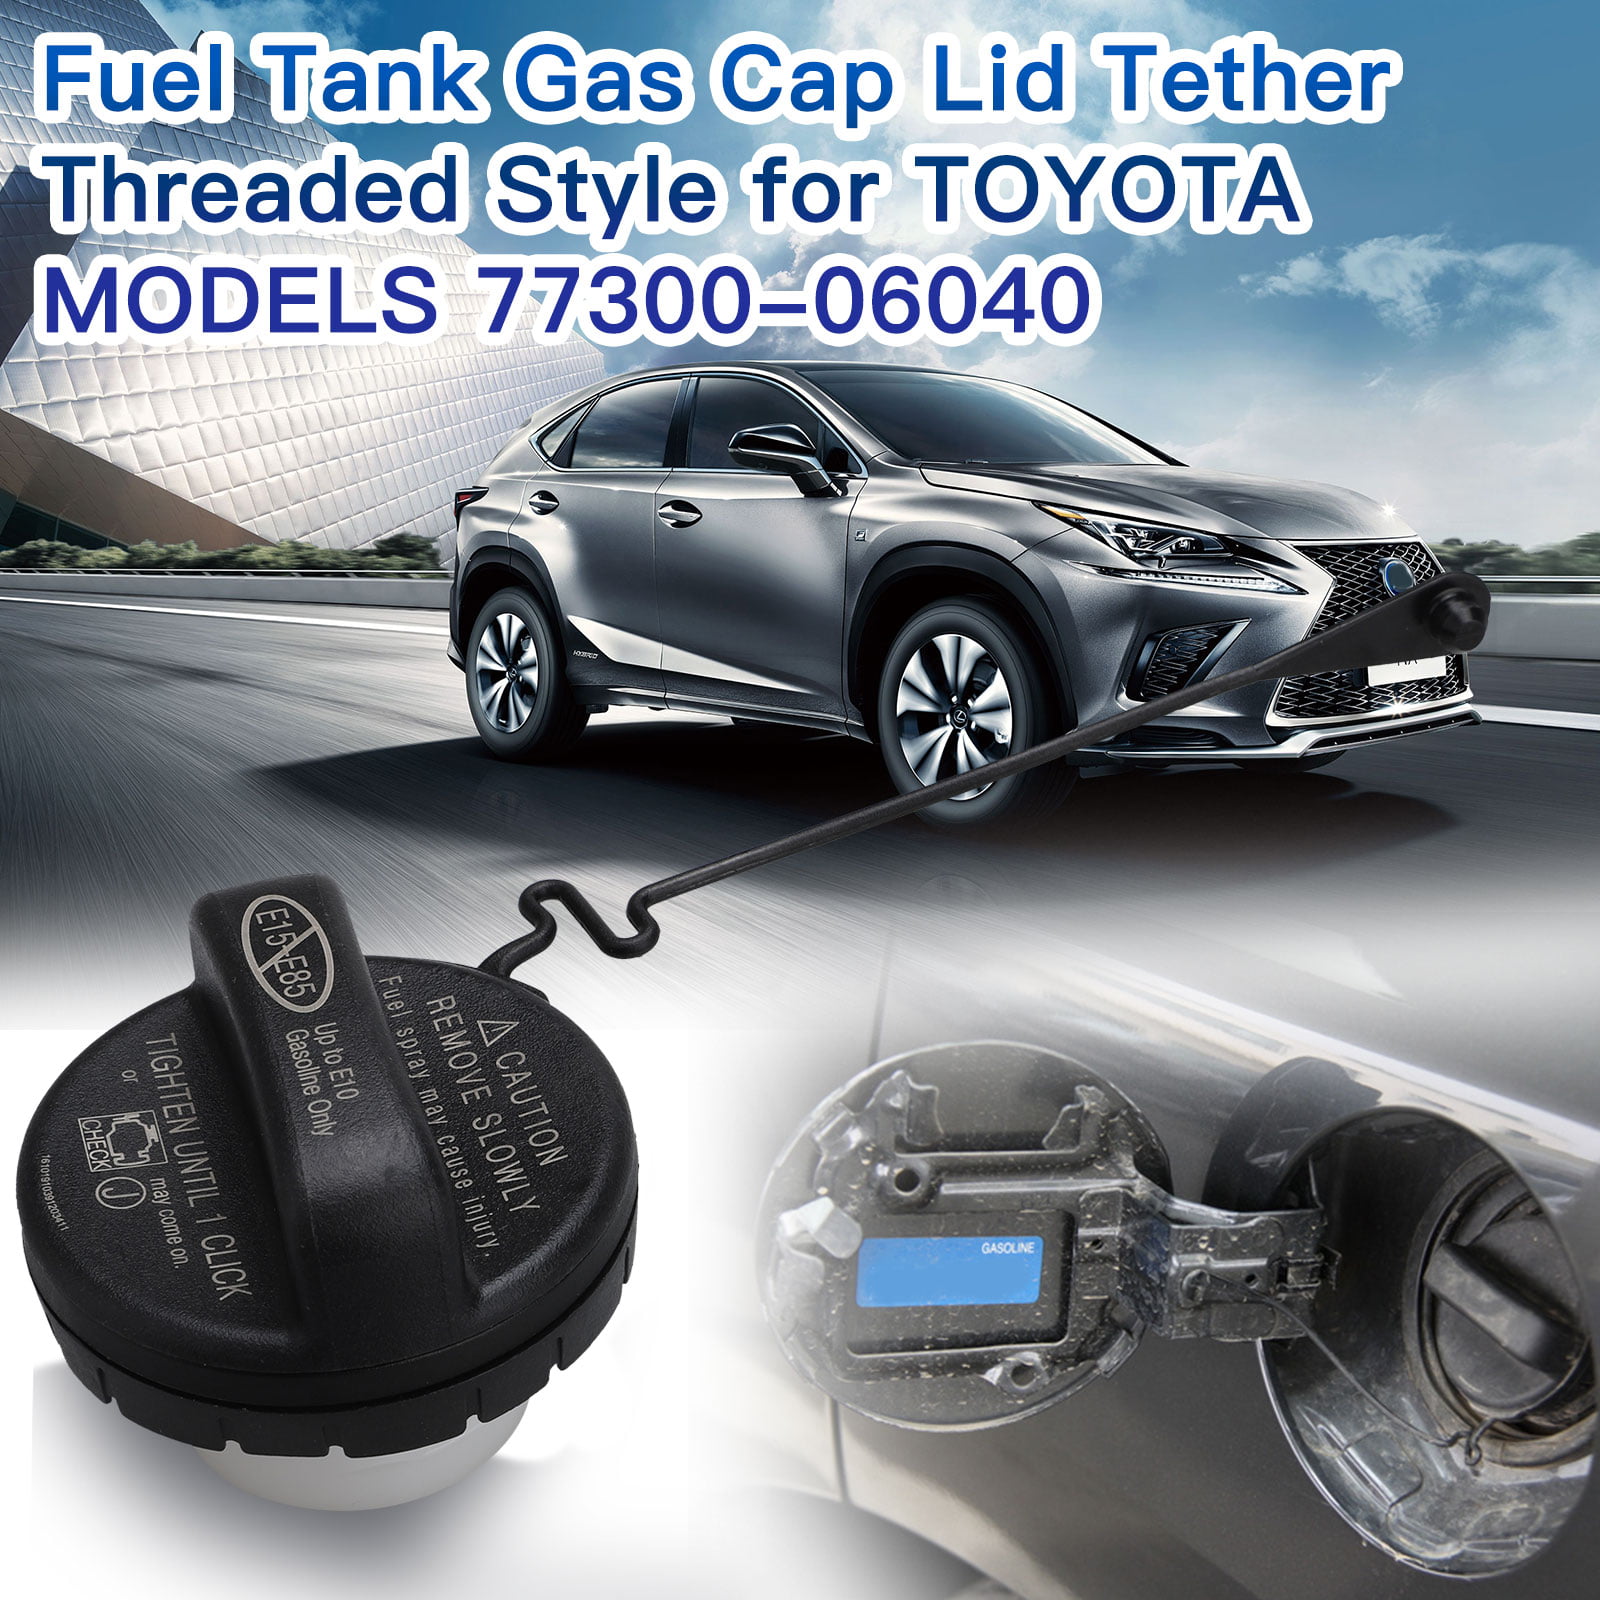 Highlander GS460 and More. Matrix Camry Avalon Corolla Tacoma 4Runner GS350 Fuel Cap Replace is suitable for Compatible with Toyota RAV4 Model 77300-06040 7730006040 Gas Cap ES350 